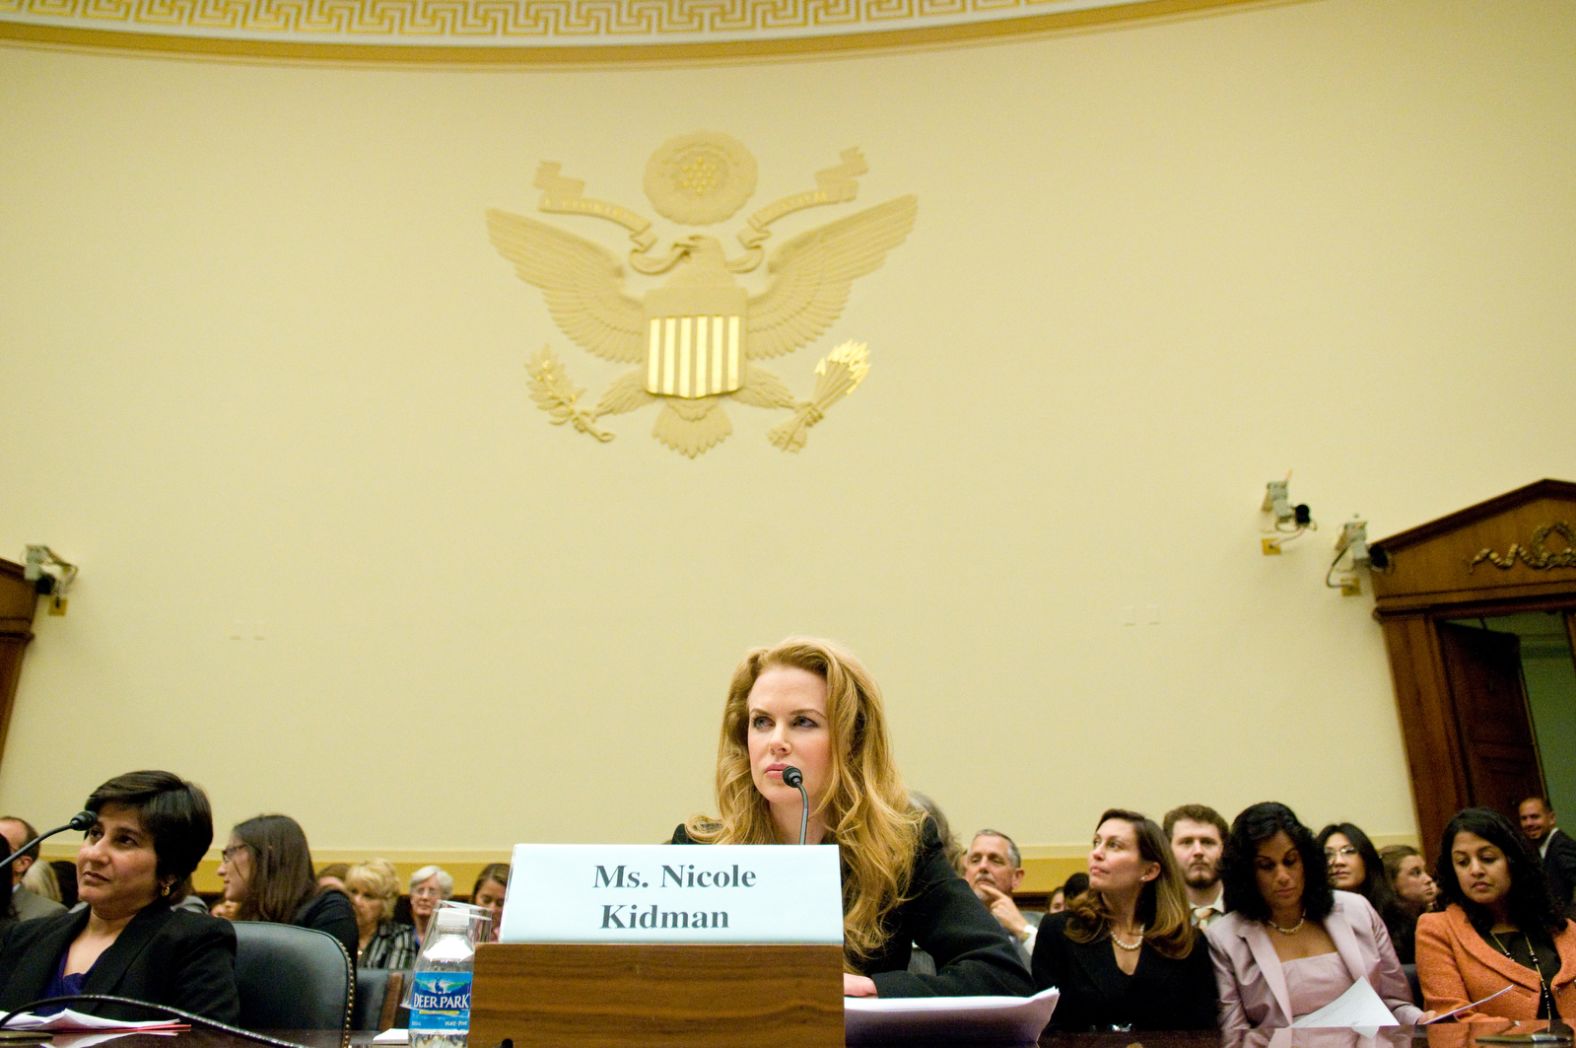 Kidman speaks before members of the US Congress during a hearing in 2009. The hearing was titled International Violence Against Women: Stories and Solutions.